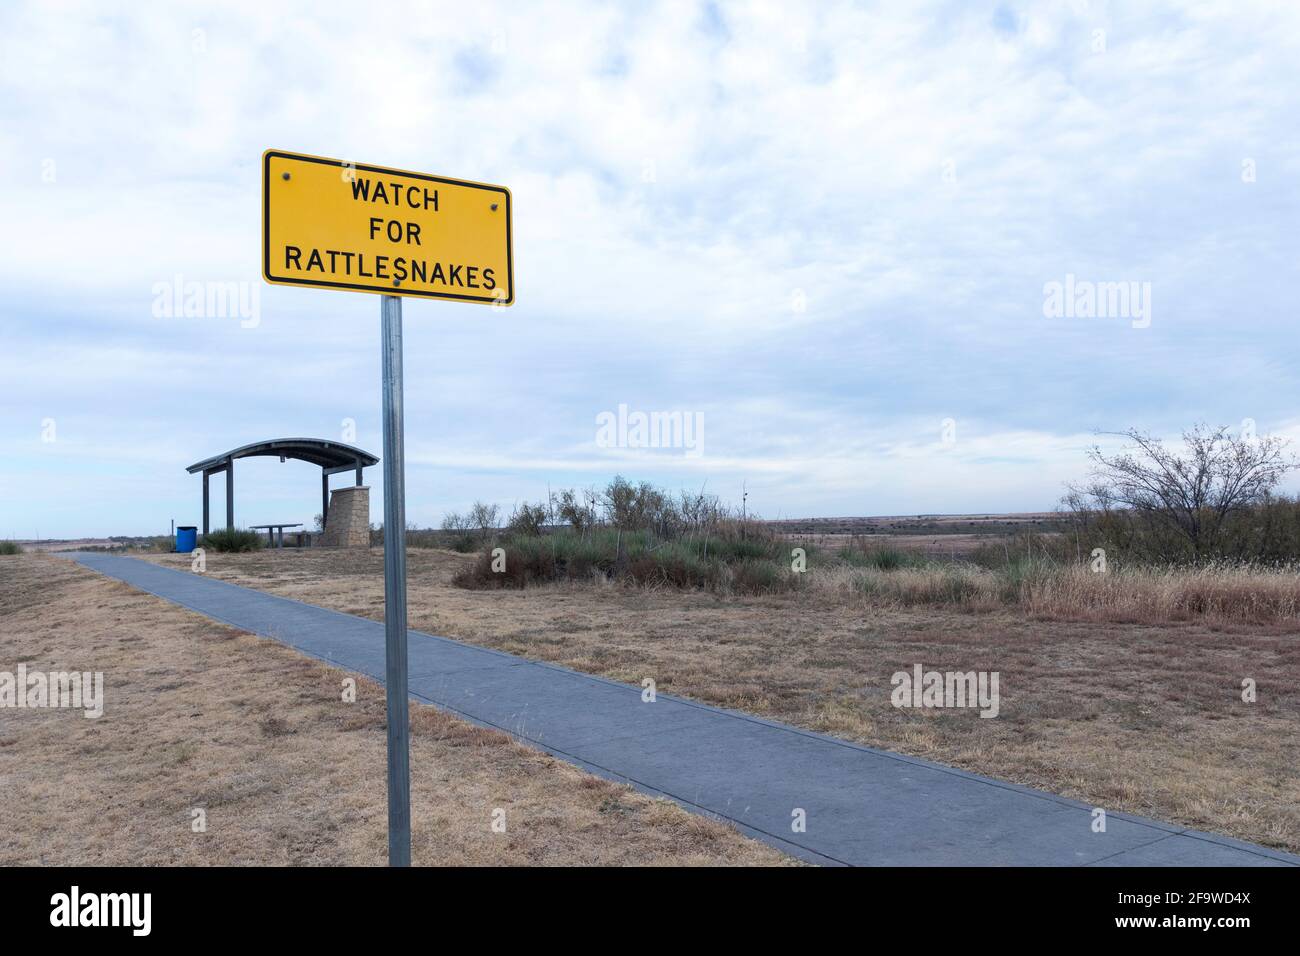 Watch for RATTLESNAKES at US-287 rest area Stock Photo